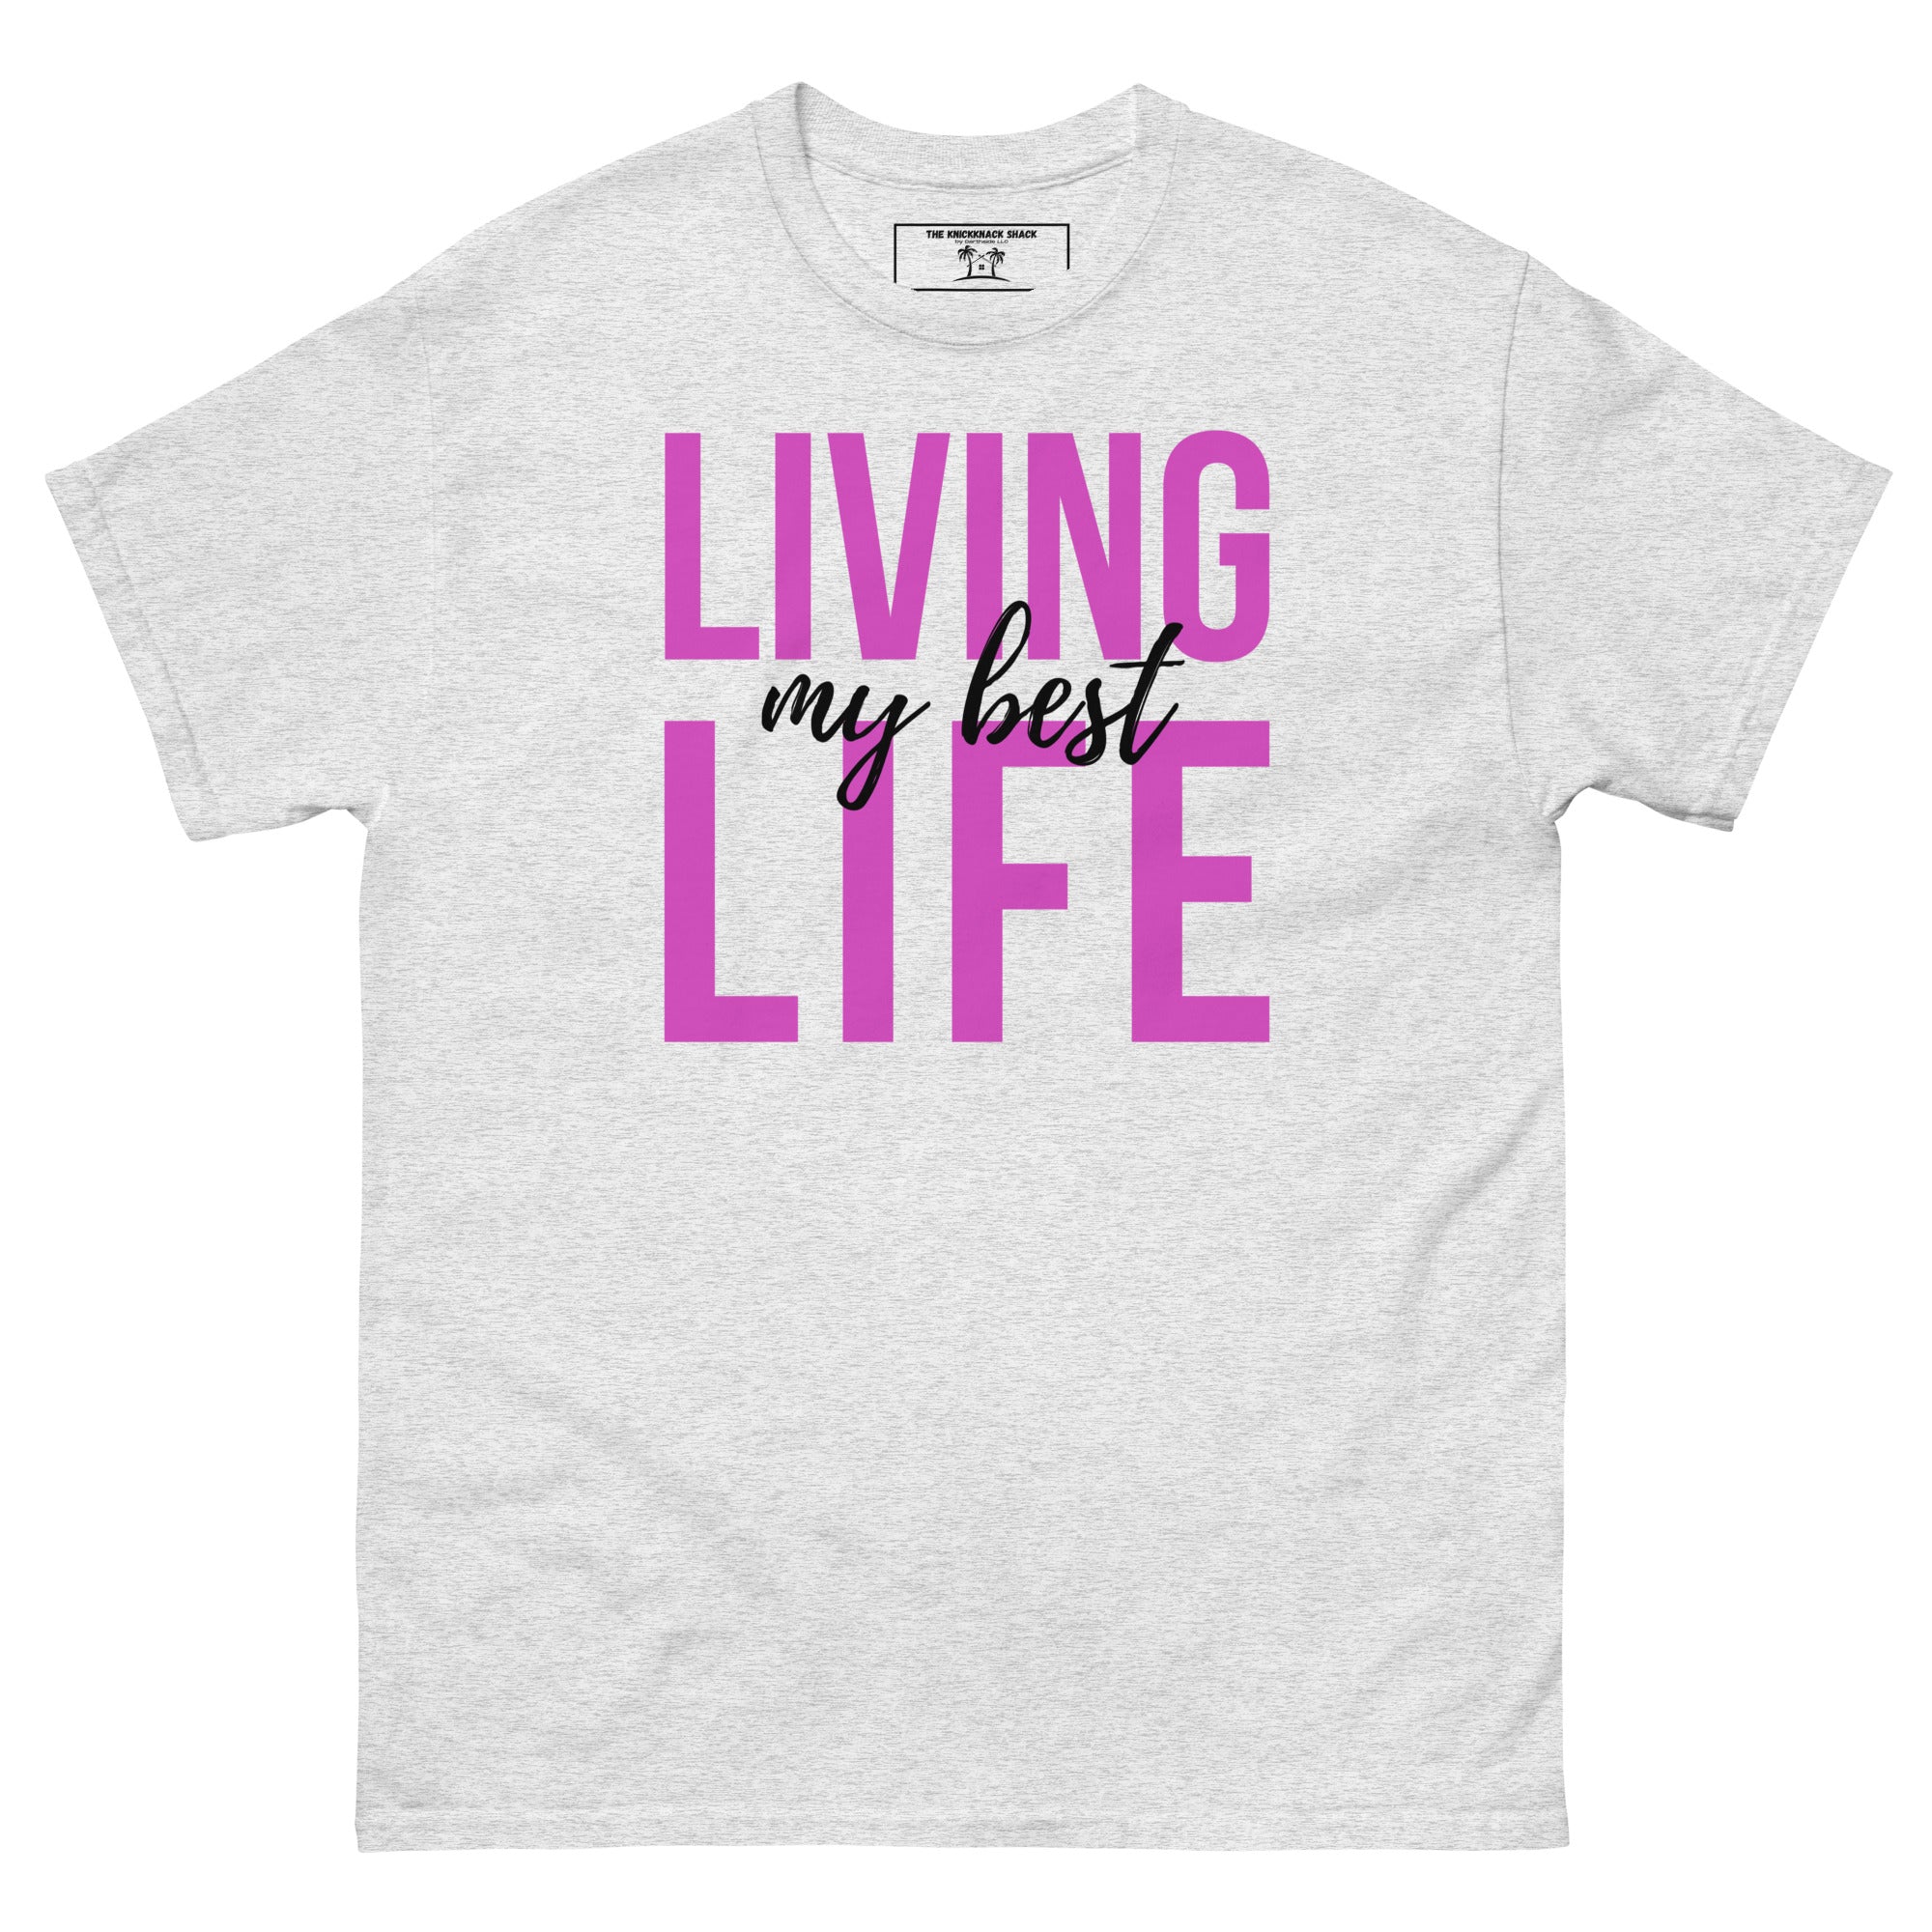 Classic Tee - My Best Life  (Light Colors)